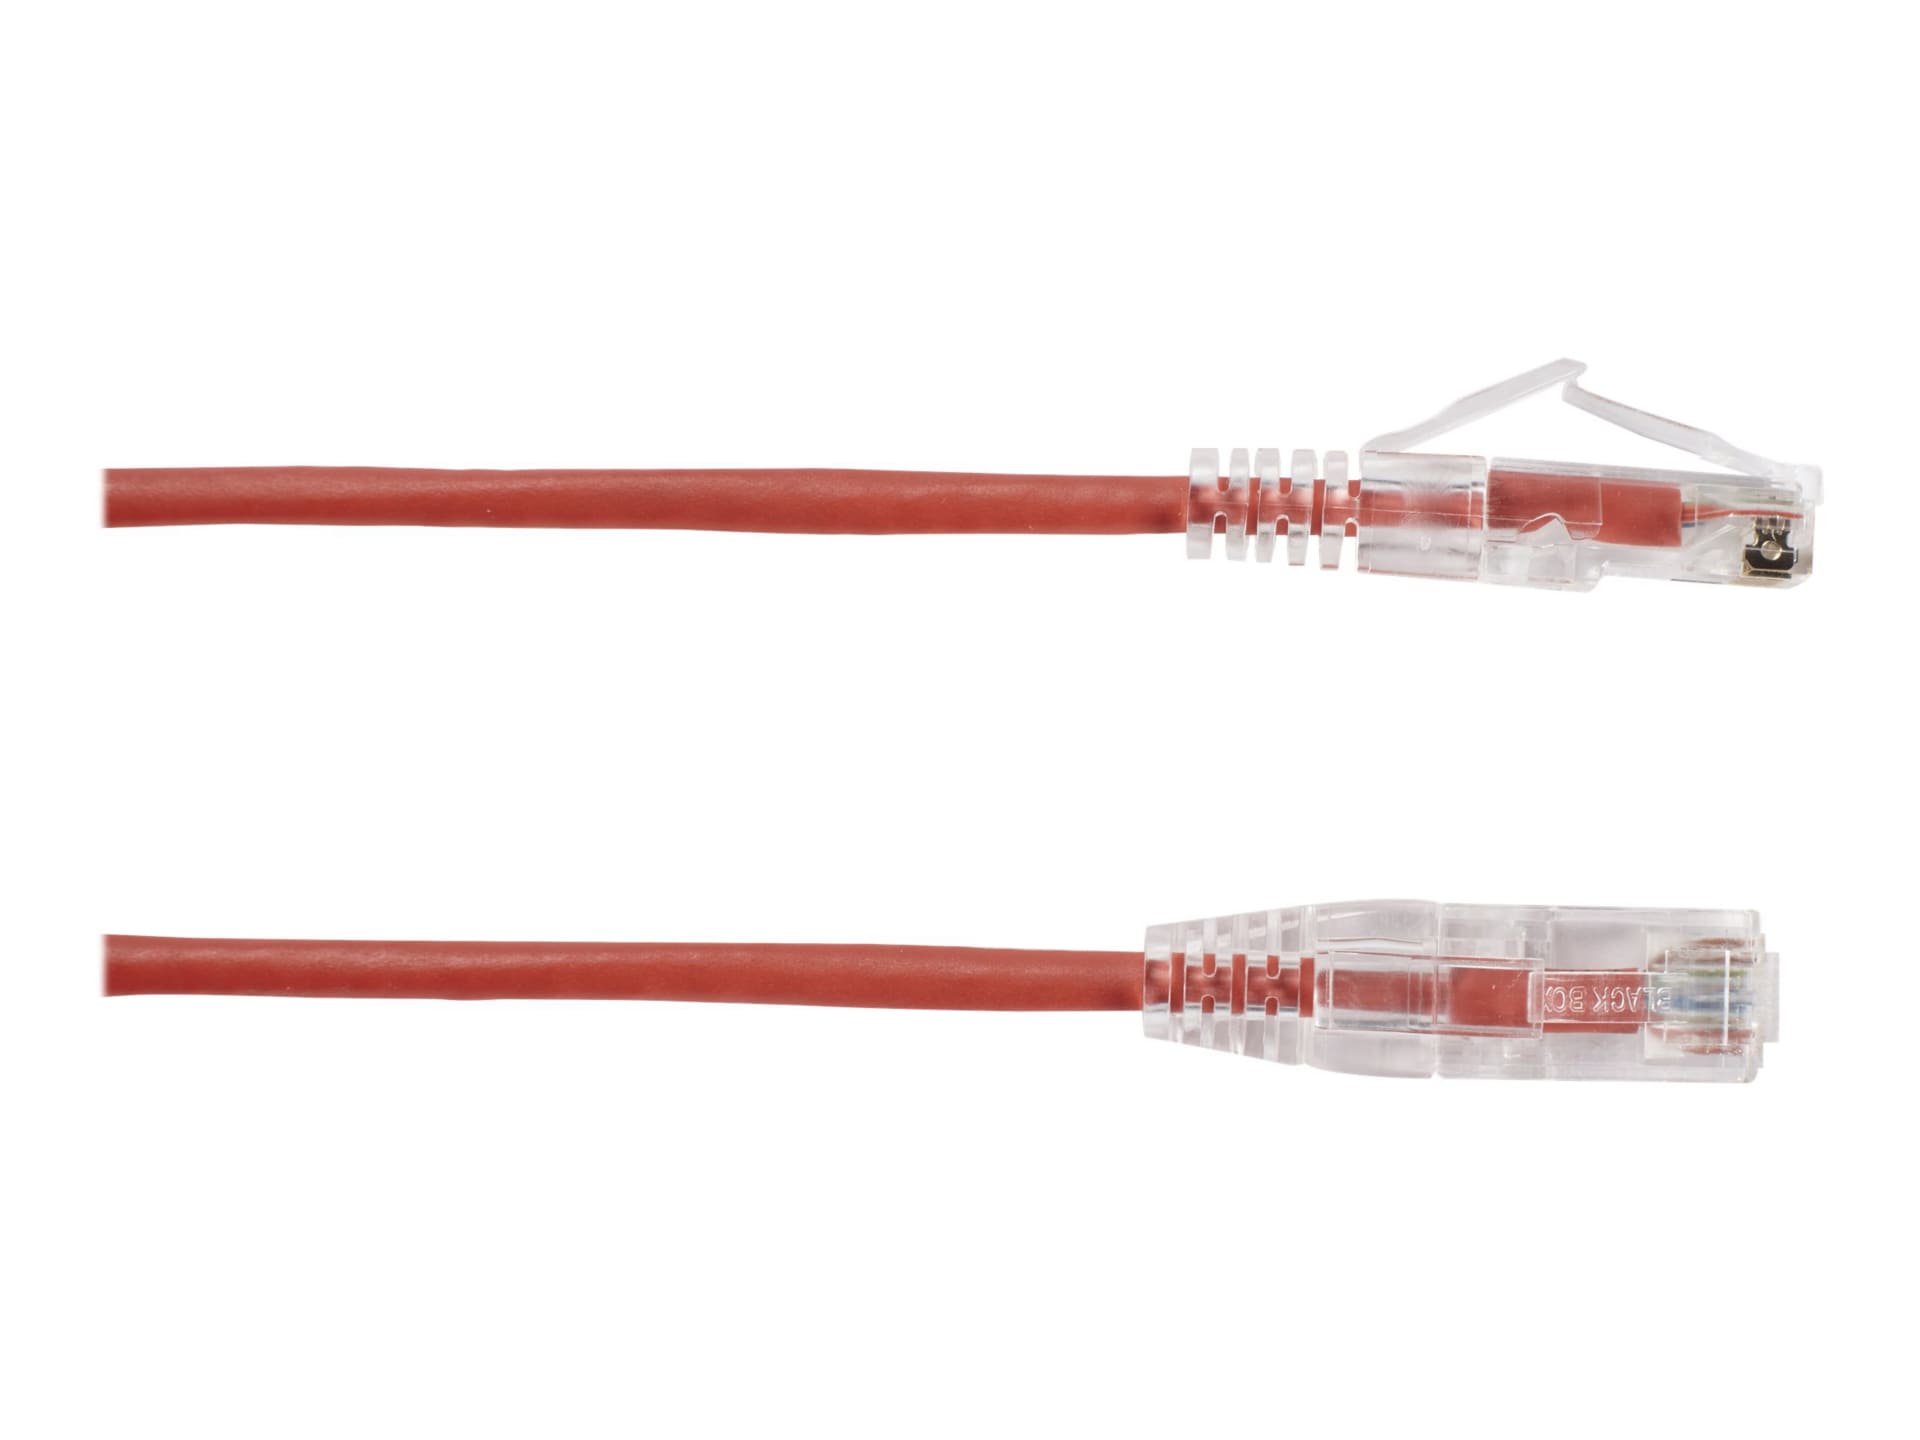 Black Box Slim-Net patch cable - 20 ft - red